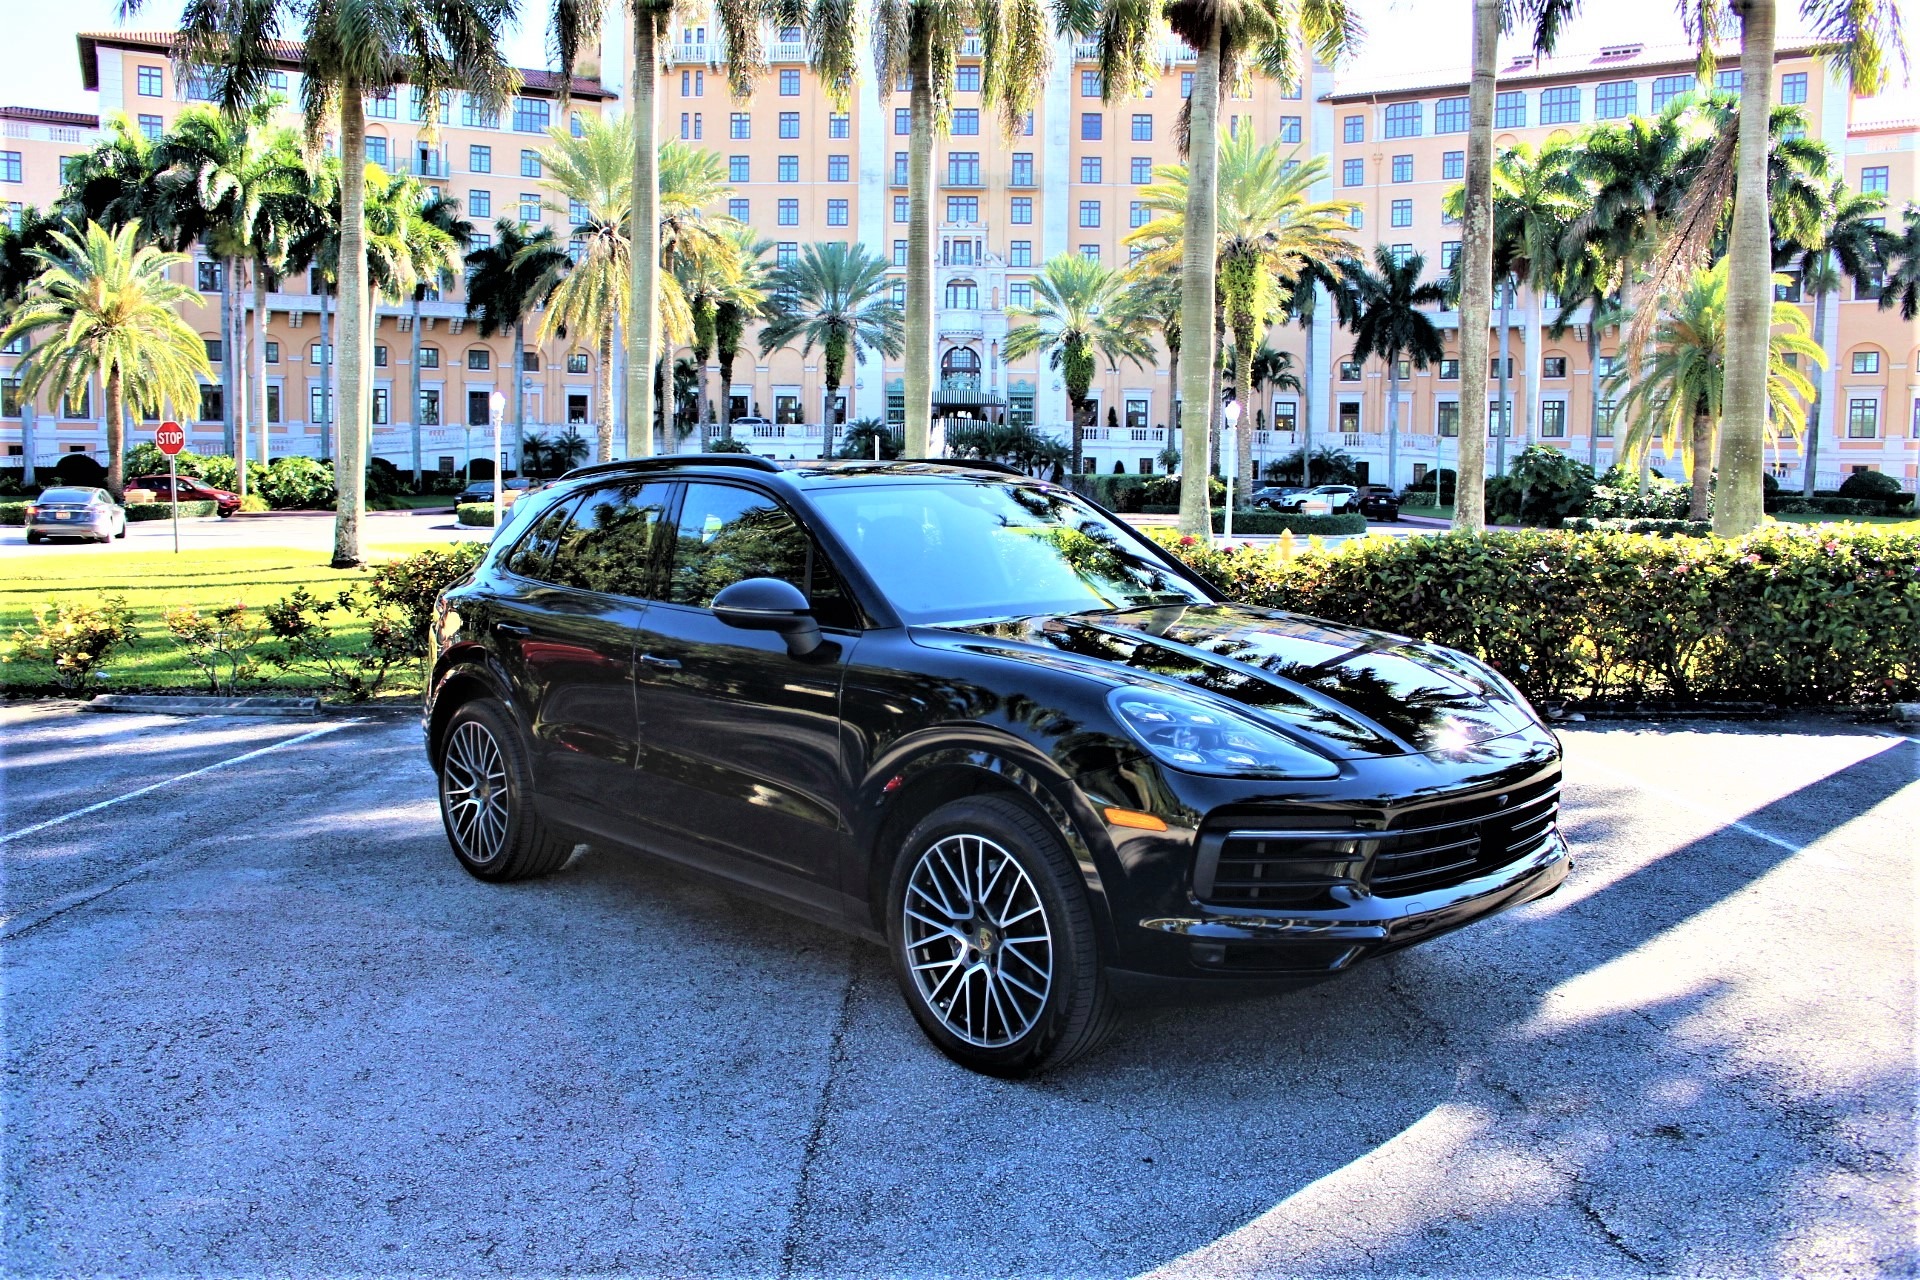 Used 2019 Porsche Cayenne for sale $72,850 at The Gables Sports Cars in Miami FL 33146 1